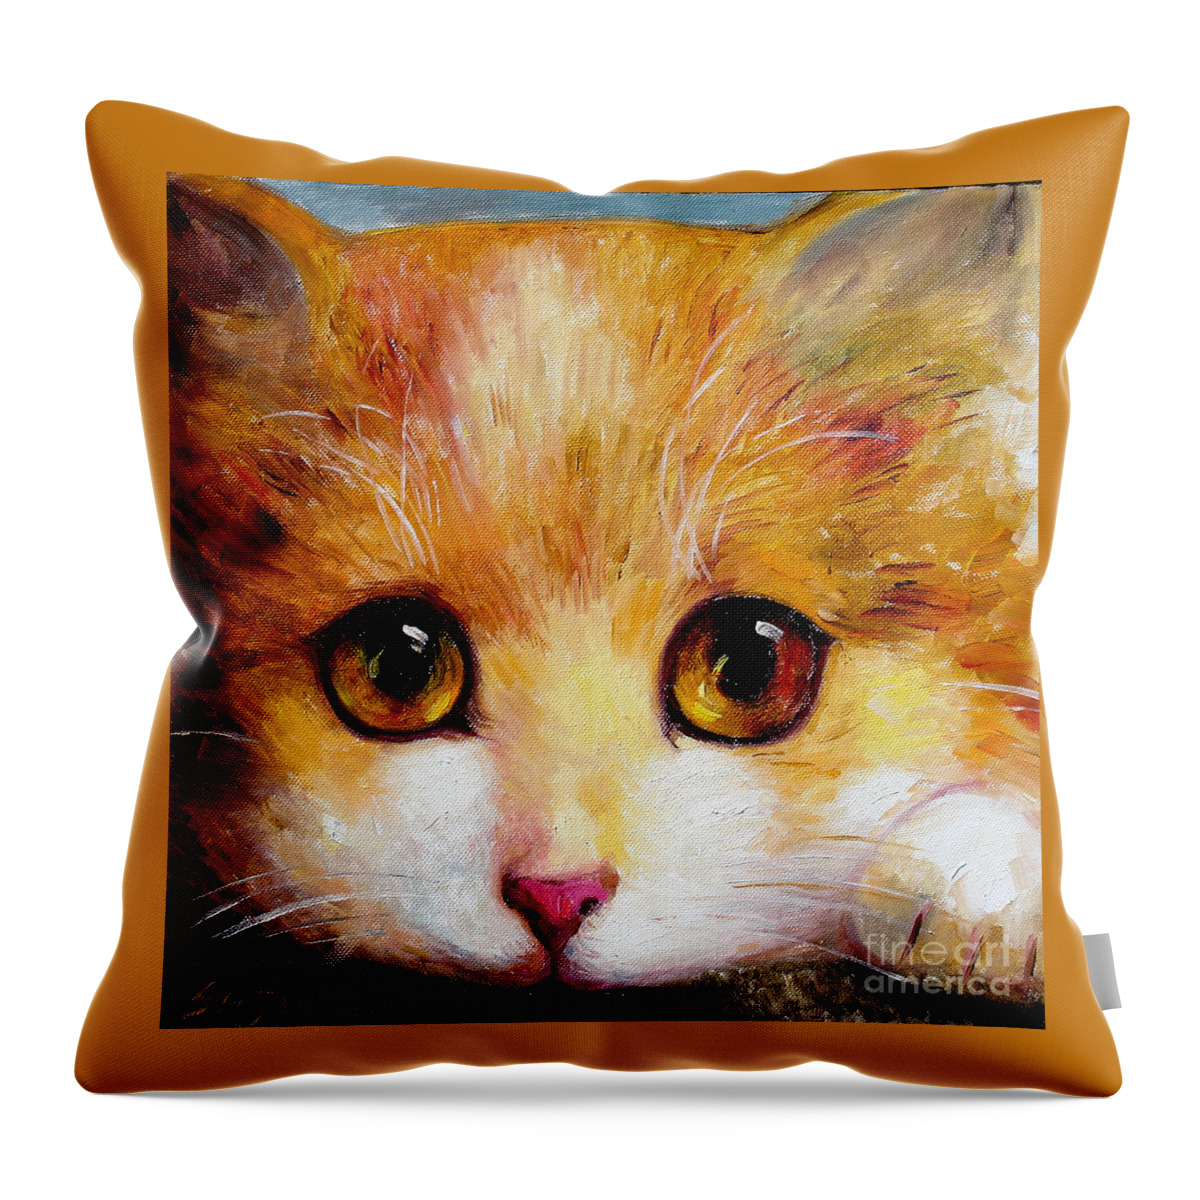 Portrait Throw Pillow featuring the painting Golden Eye by Shijun Munns